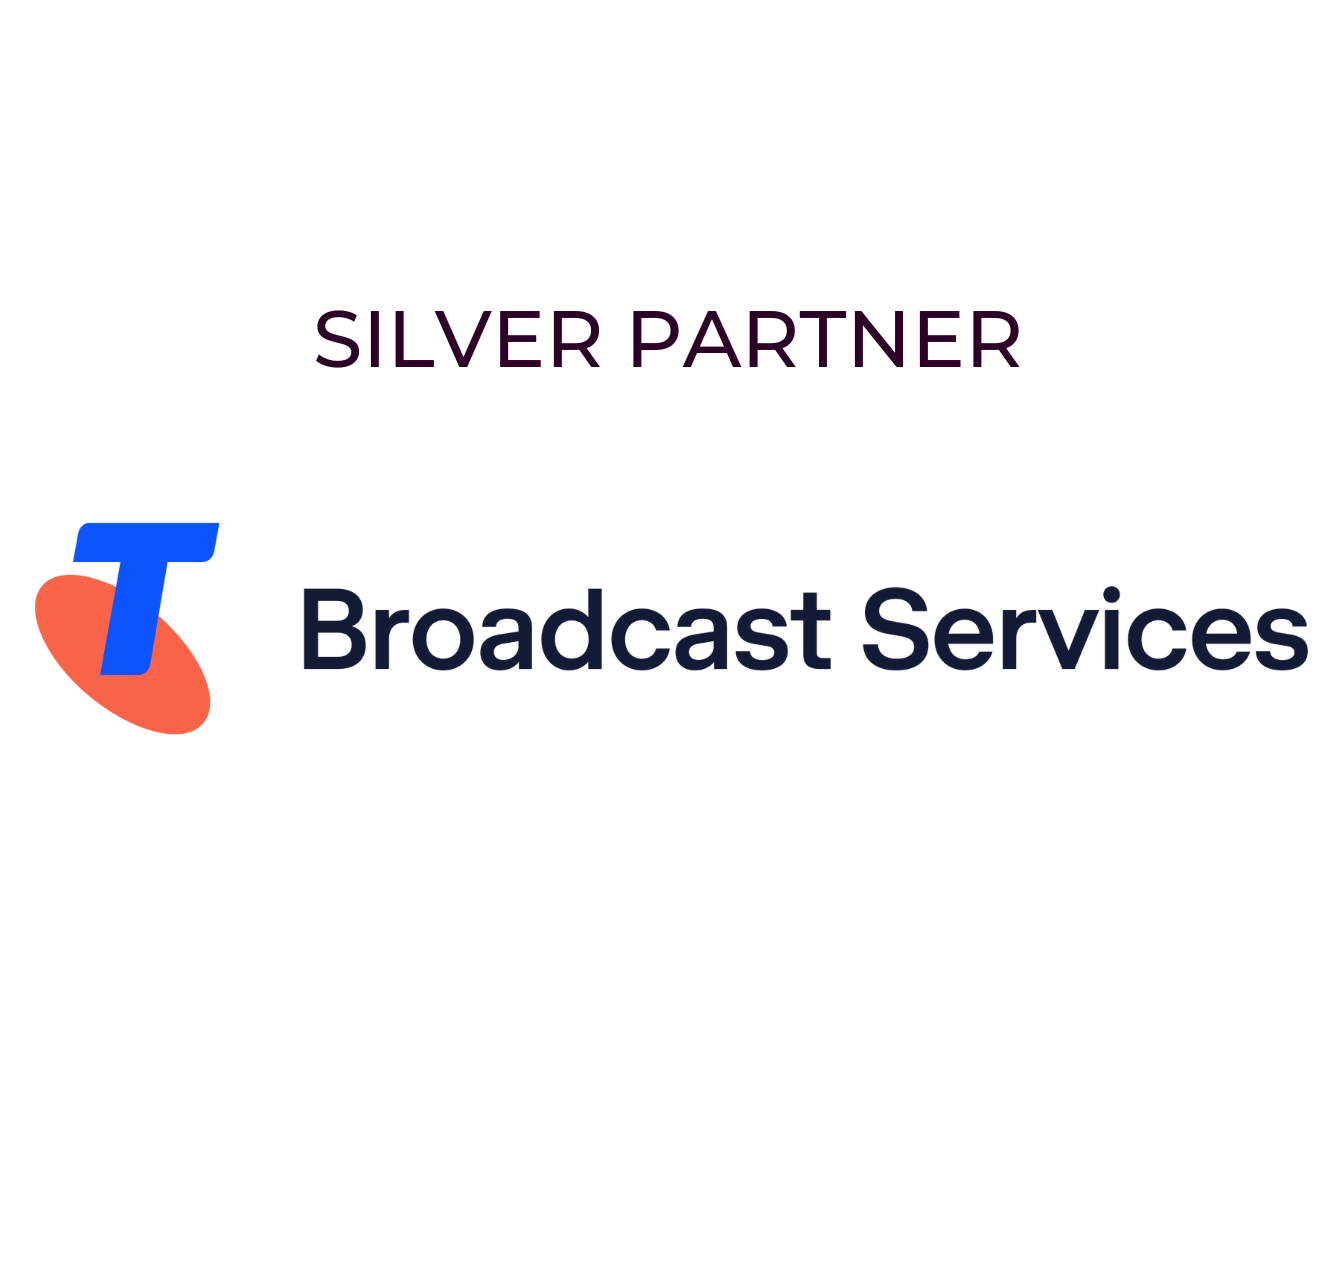 Telstra Broadcast Services image